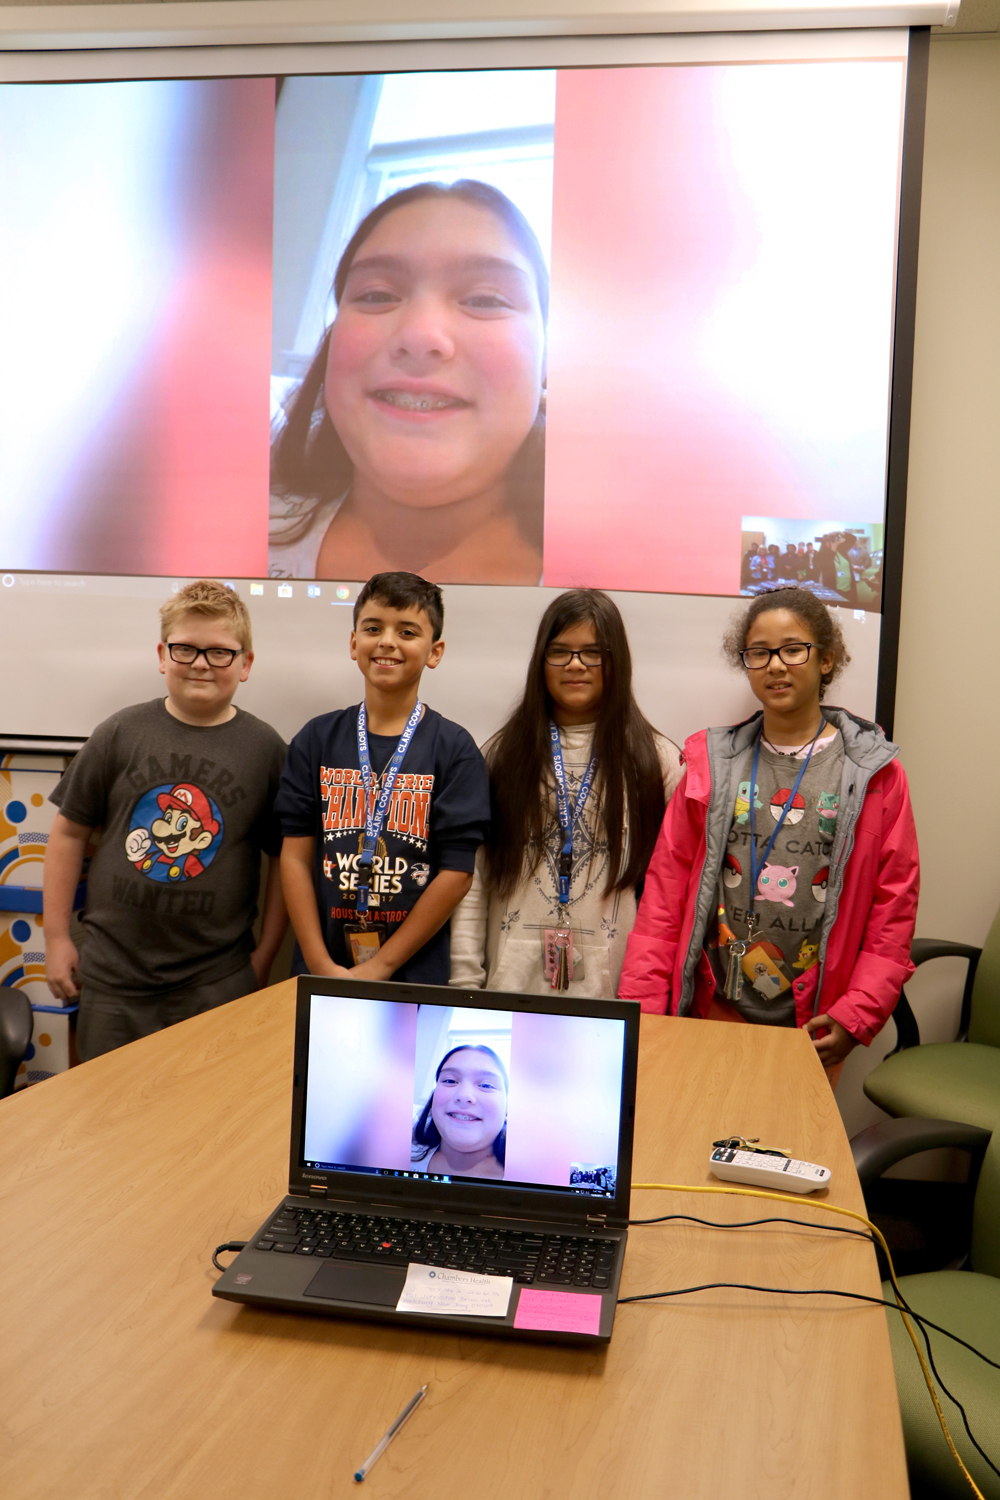  Clark Elementary fifth graders Waylon Stoerner, Major James, Anna Flores and Idaylia Larkin held a skype session with Delaney Posehn, (pictured on screen), a fifth grader from New Jersey who took up a collection for school supplies for Clark students. 